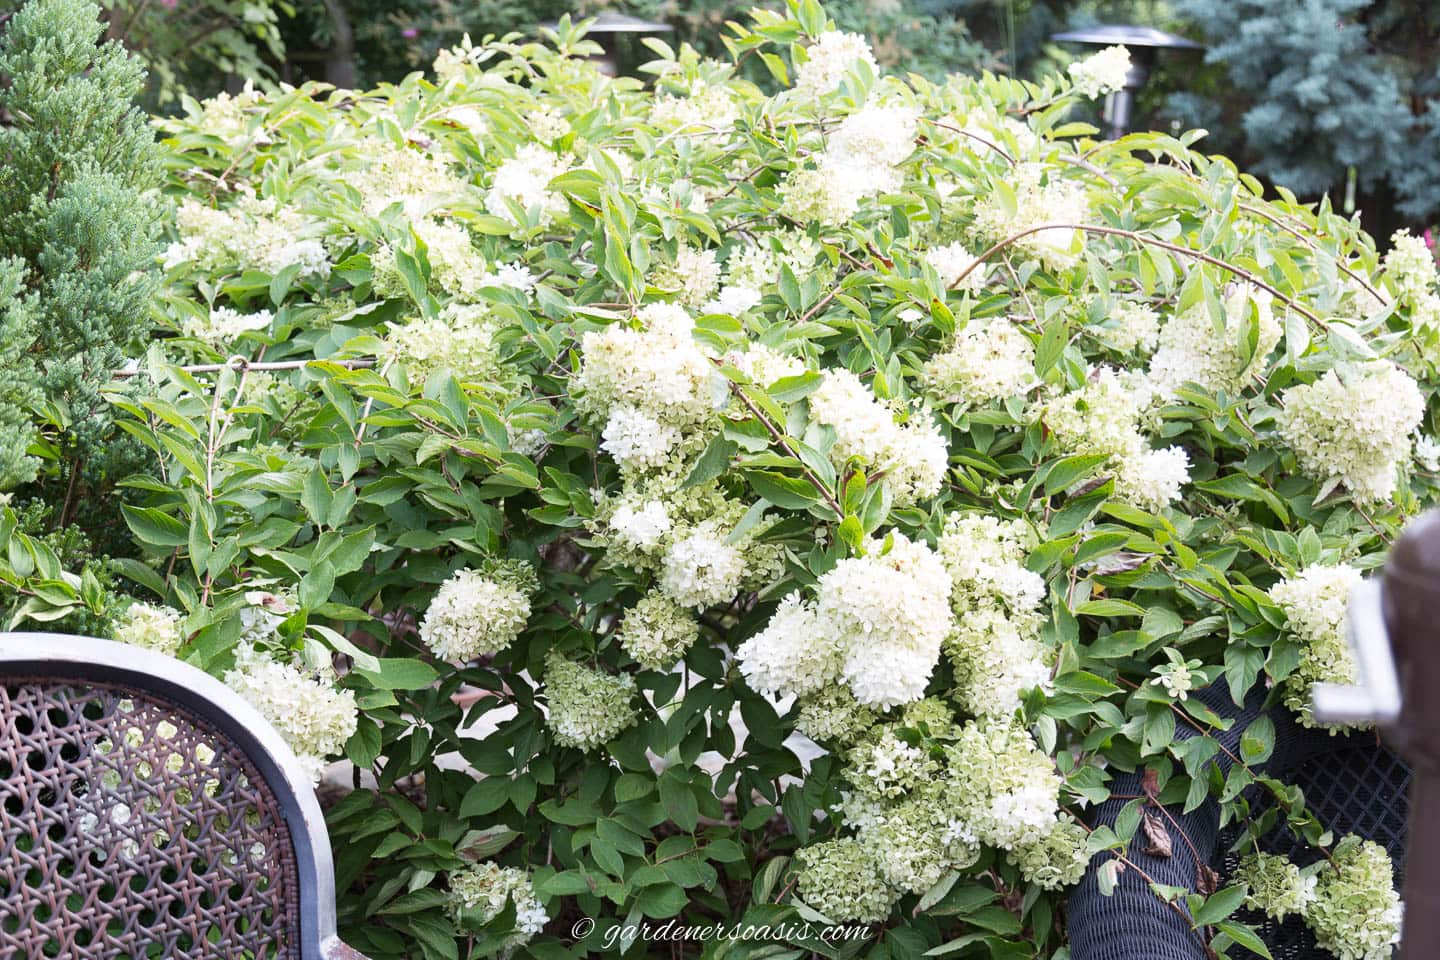 Hydrangea paniculata 'Pee Gee' covered in blooms